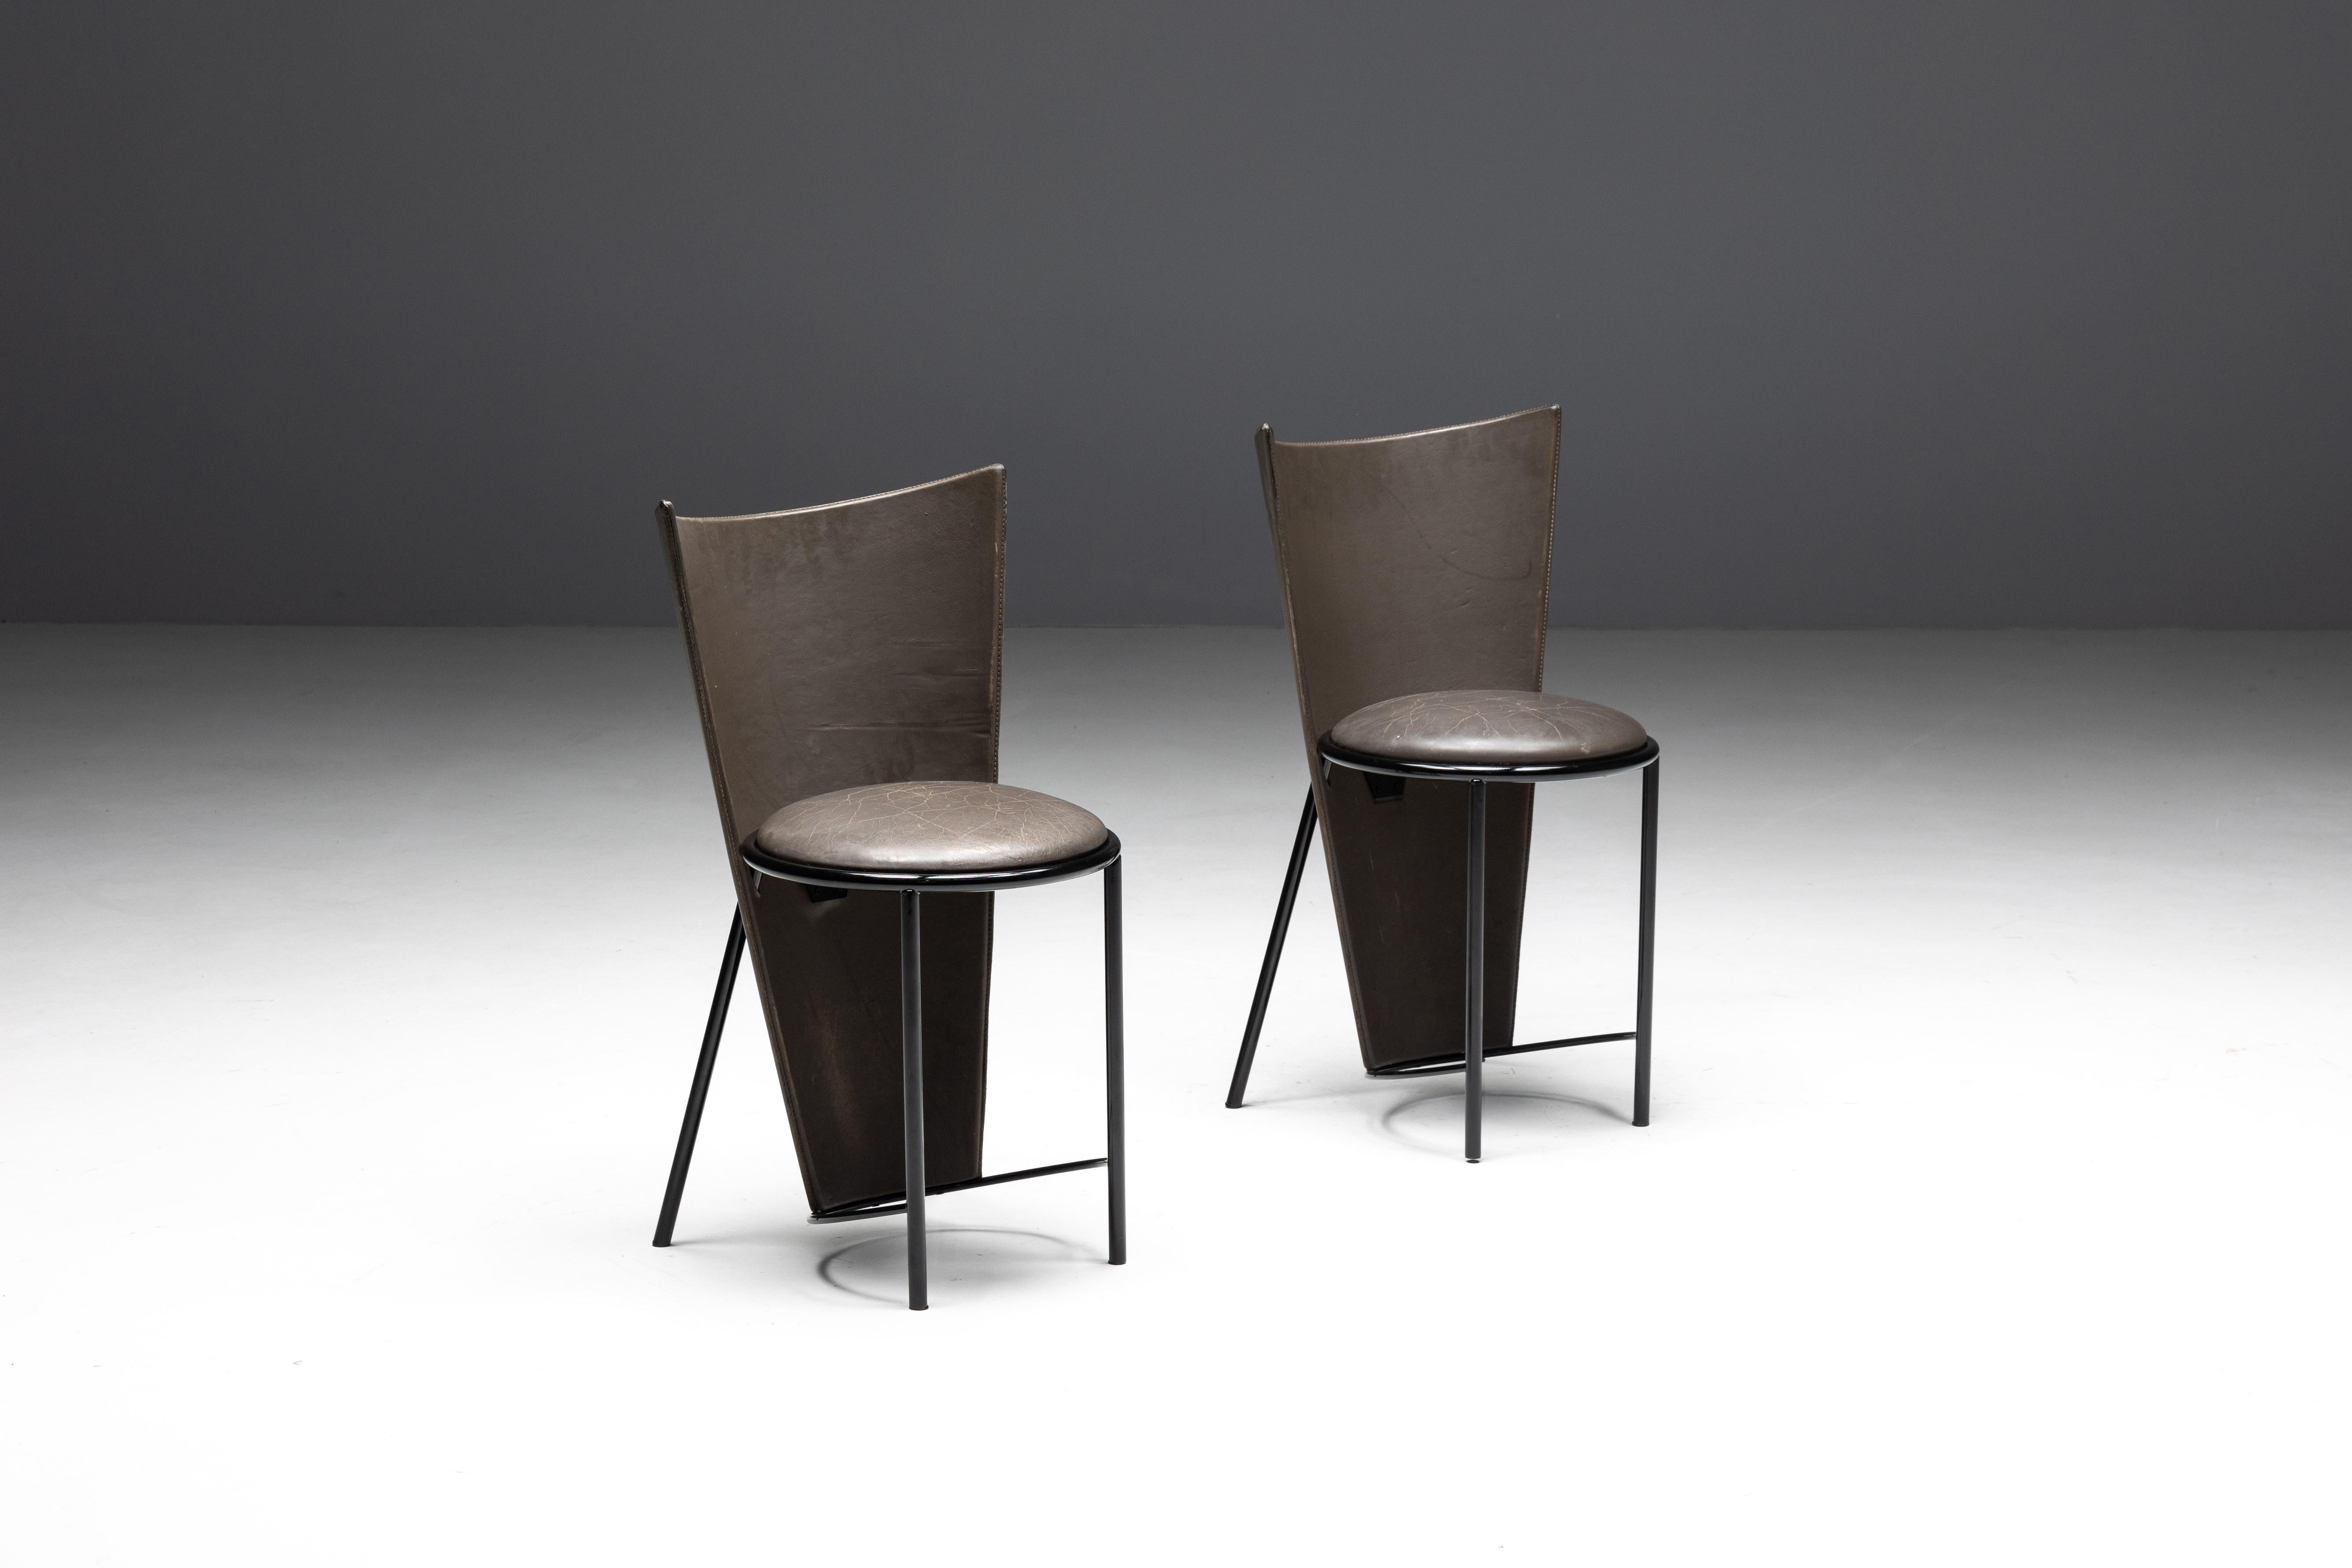 Sevilla Chairs by Frans Van Praet in Grey Leather, Belgium, 1990s For Sale 2